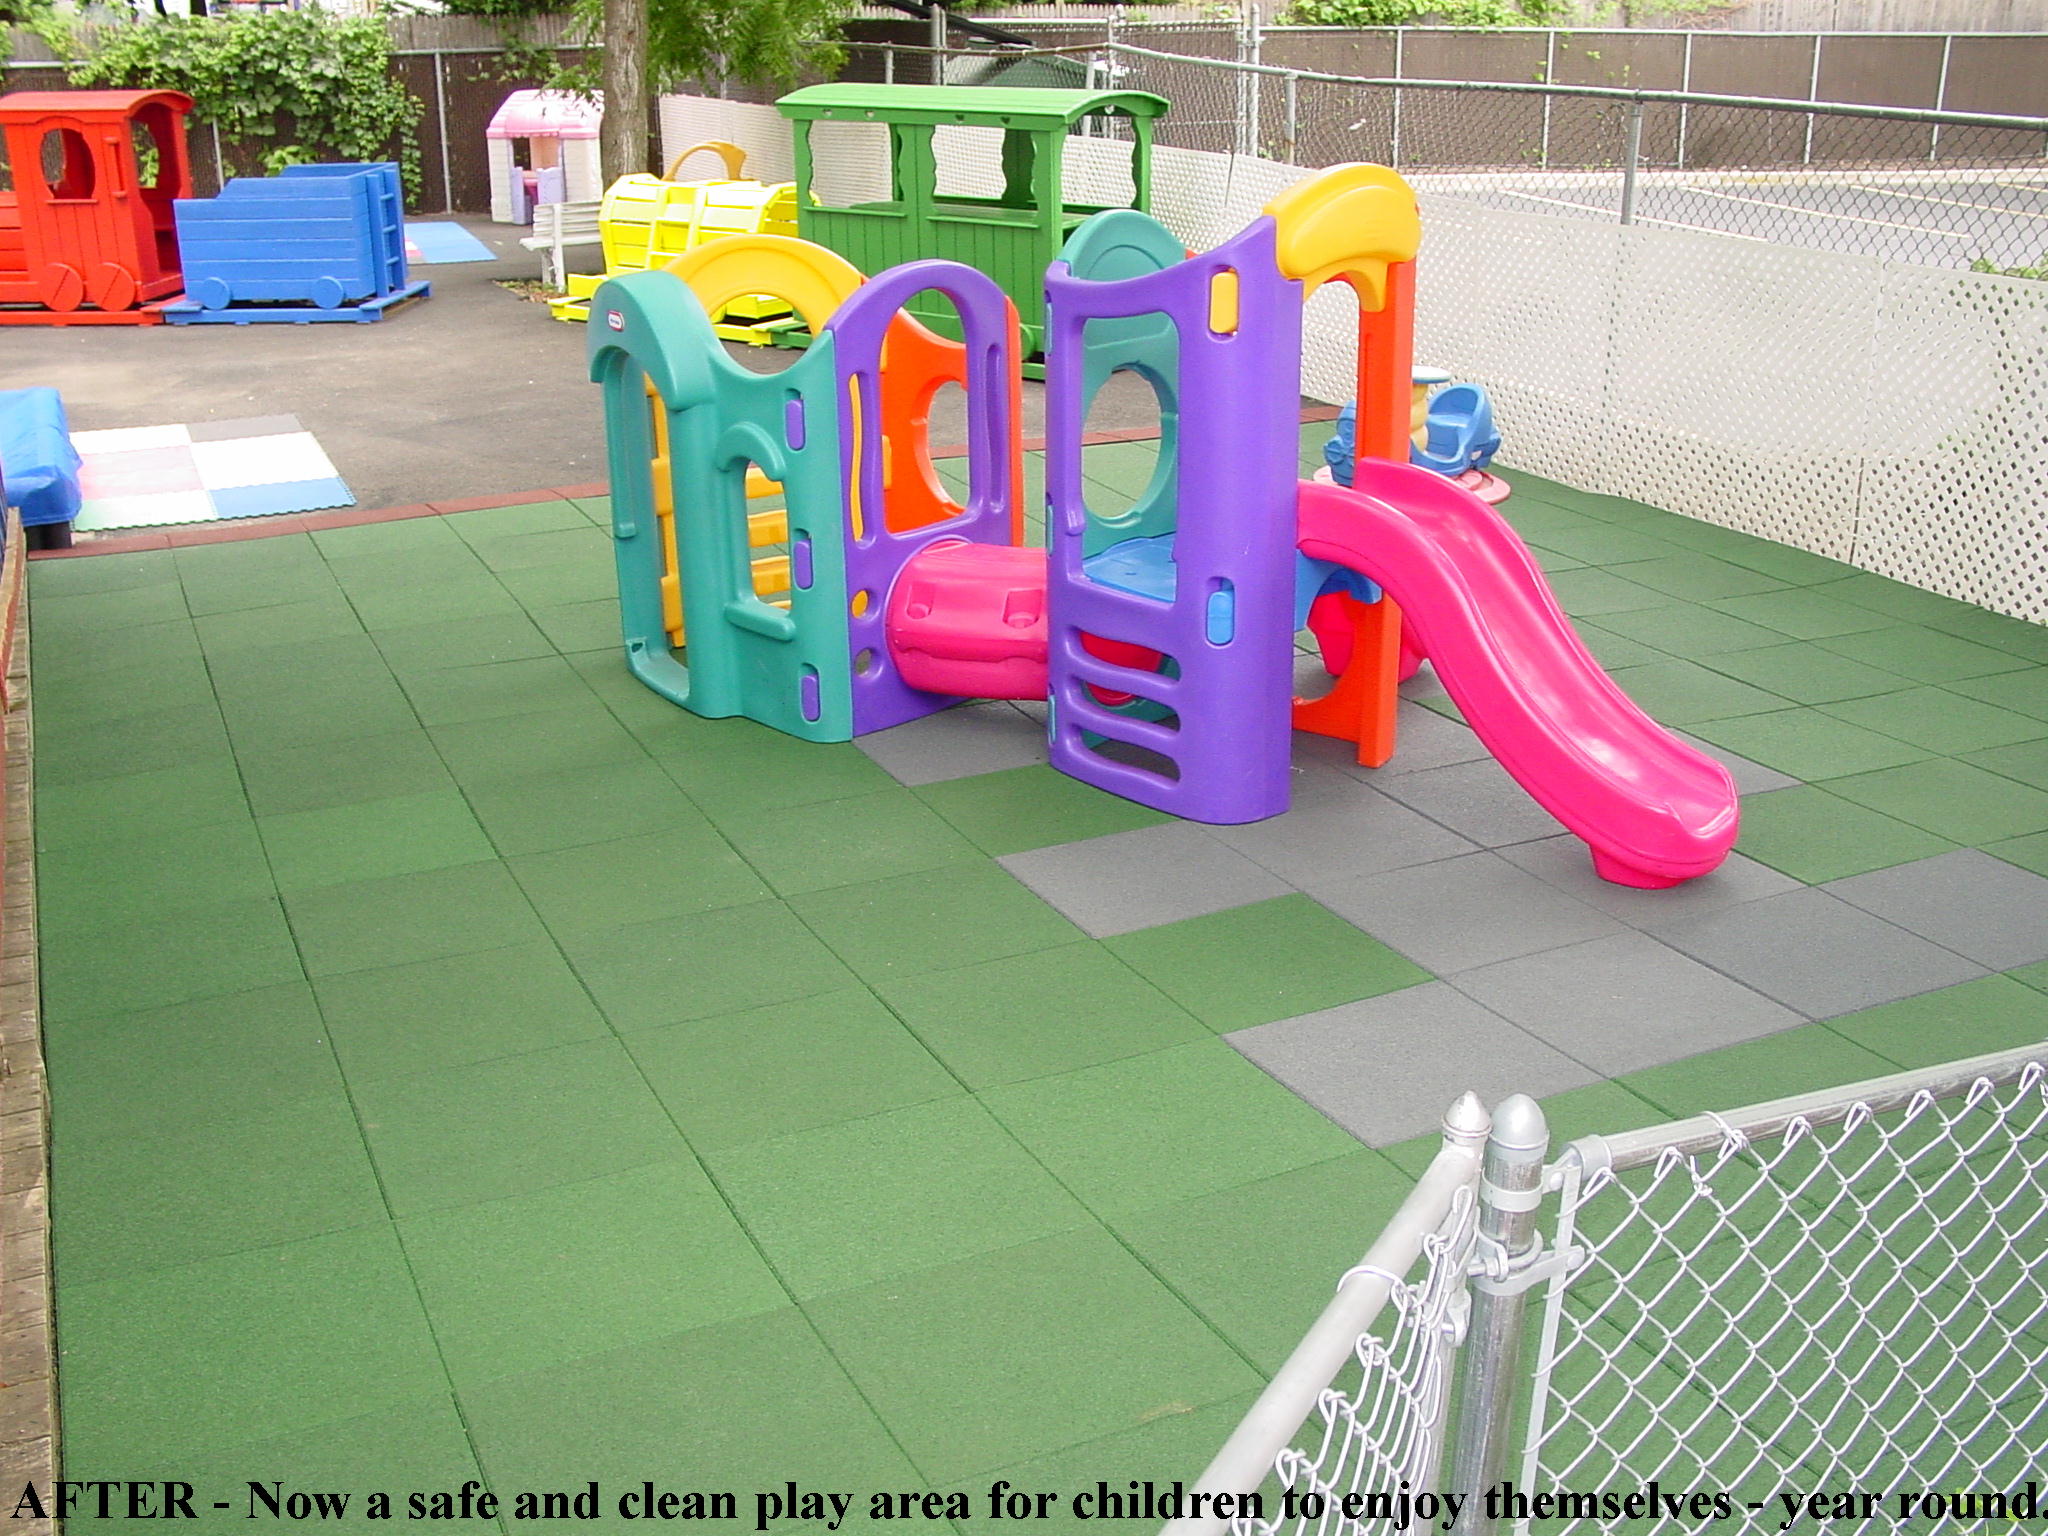 Daycare Center with 1.75" thick Pave-Land Series with Designs